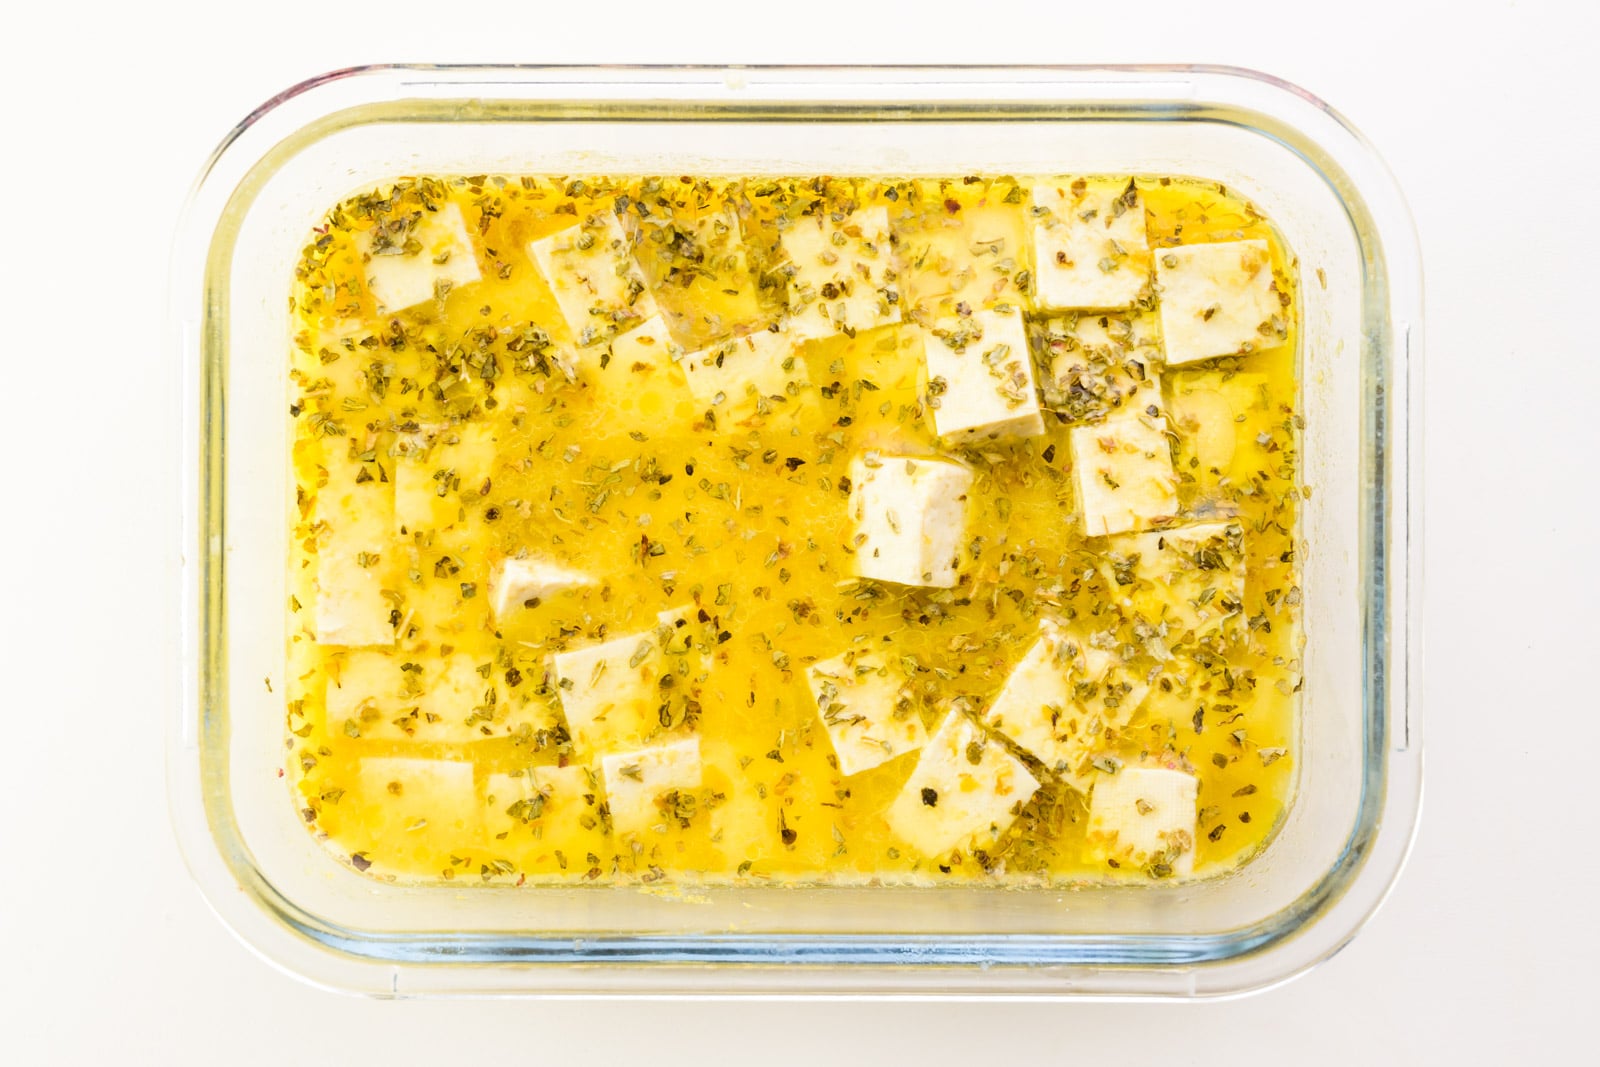 Tofu cubes are marinating in a broth with spices and other flavorings.